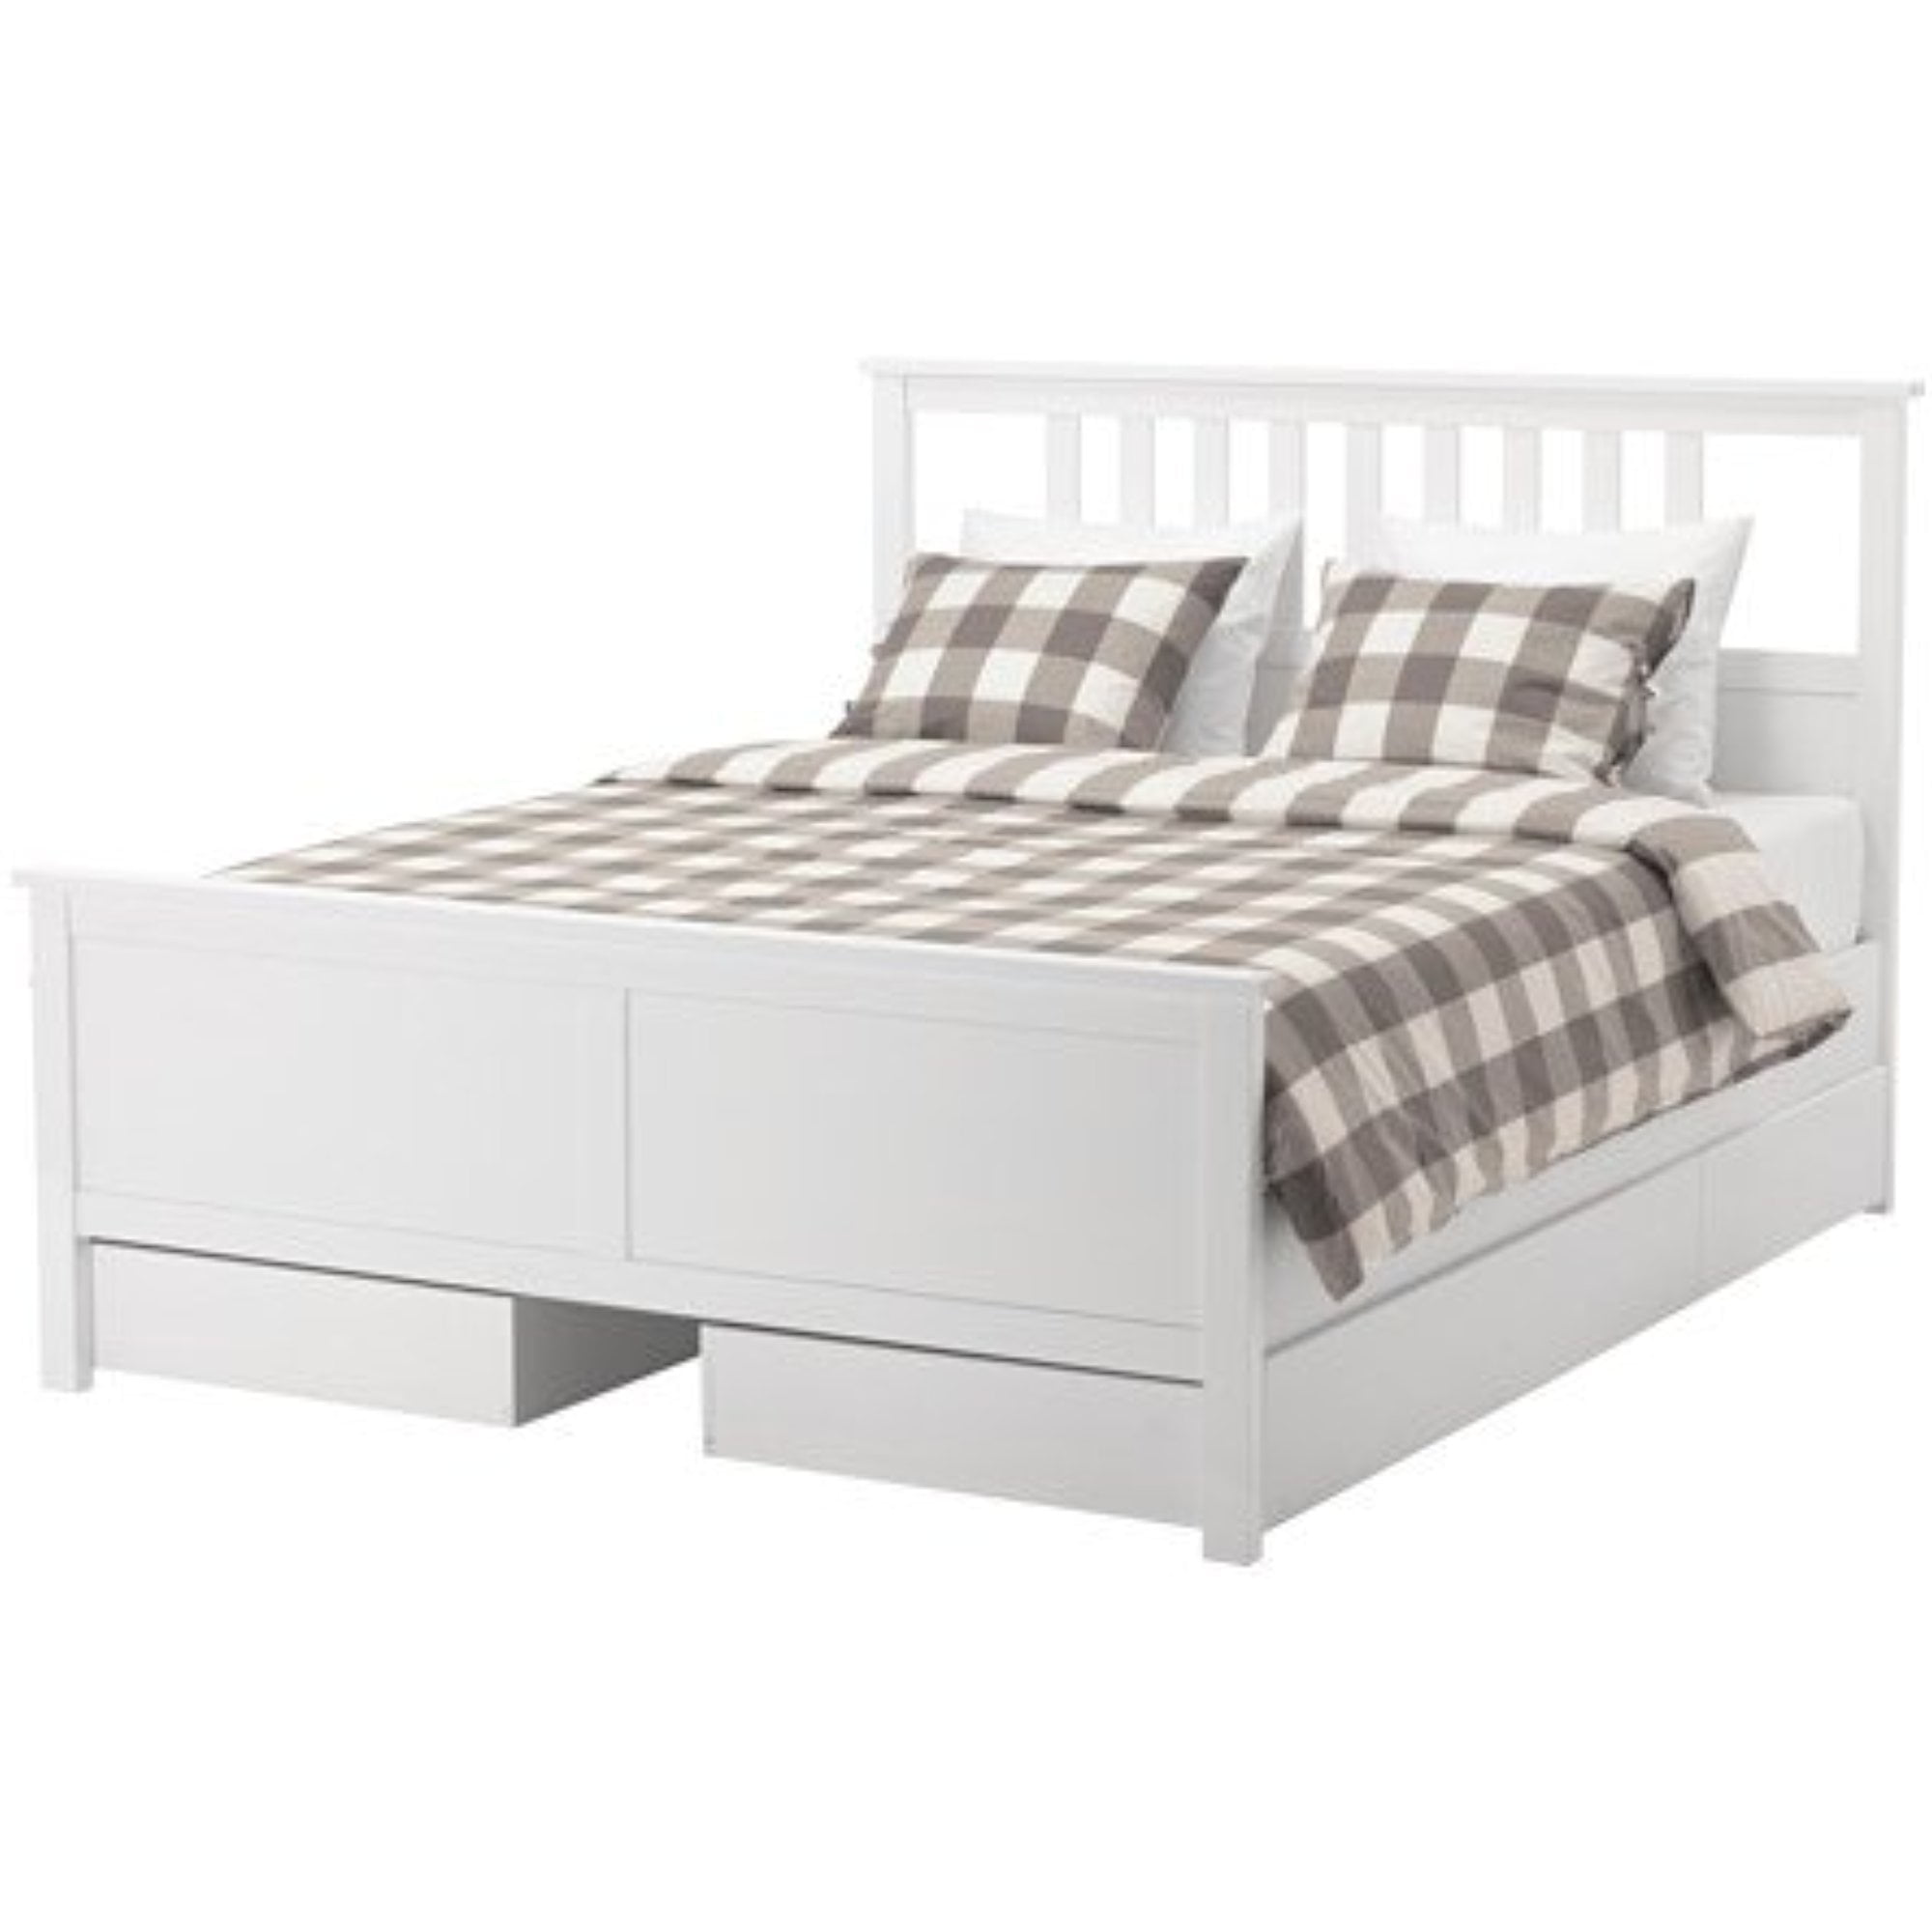 Ikea King Size Bed Frame With 4 Storage, King Platform Bed With Storage Ikea